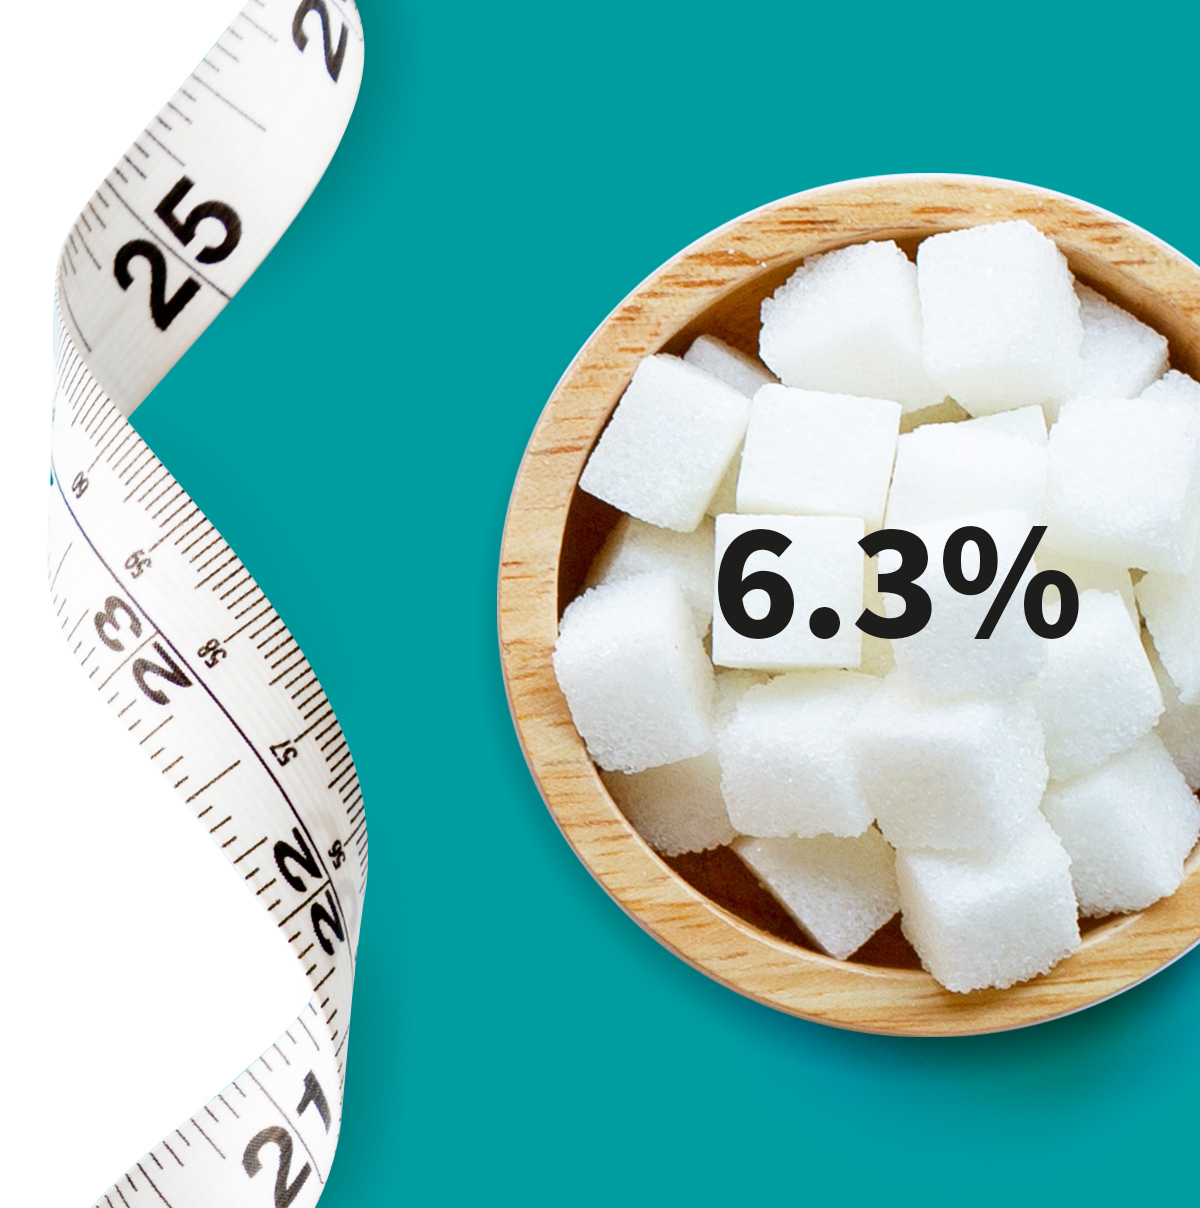 [.ES-es Spain (spanish)] •	A measuring tape and a bowl full of sugar cubes shown as a metaphor for diabetes